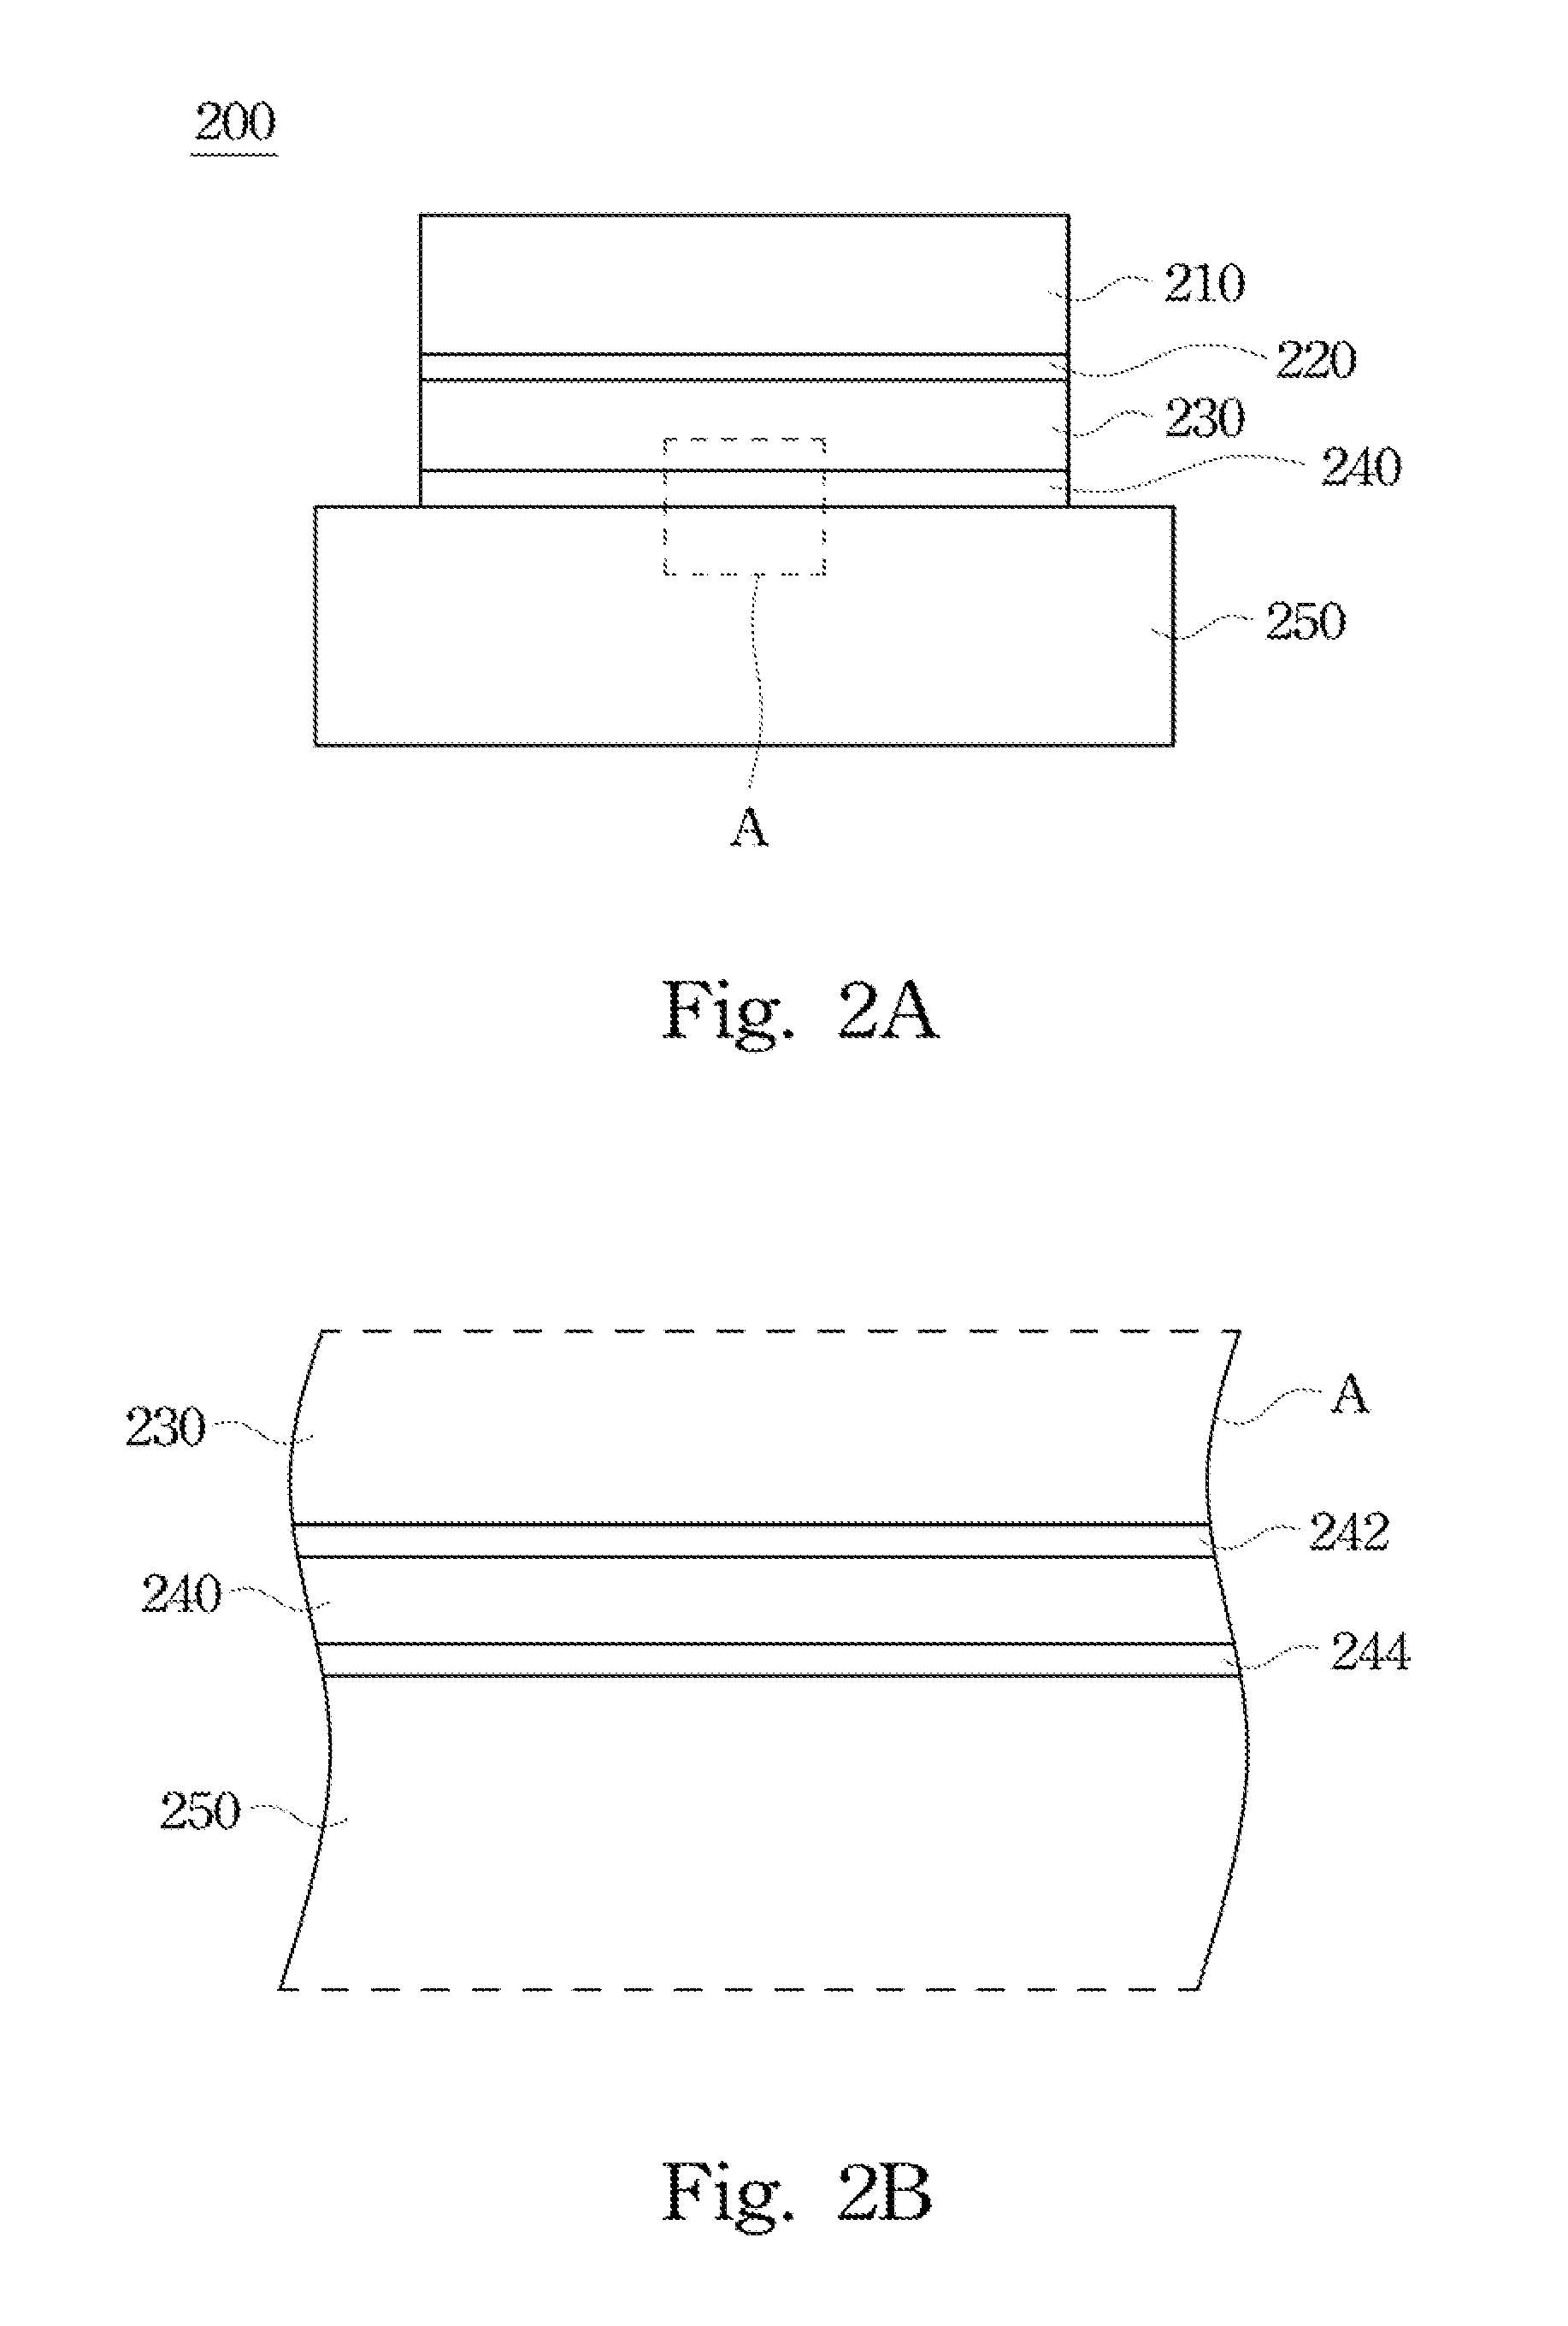 Conduction cooled package laser and packaging method for forming the same